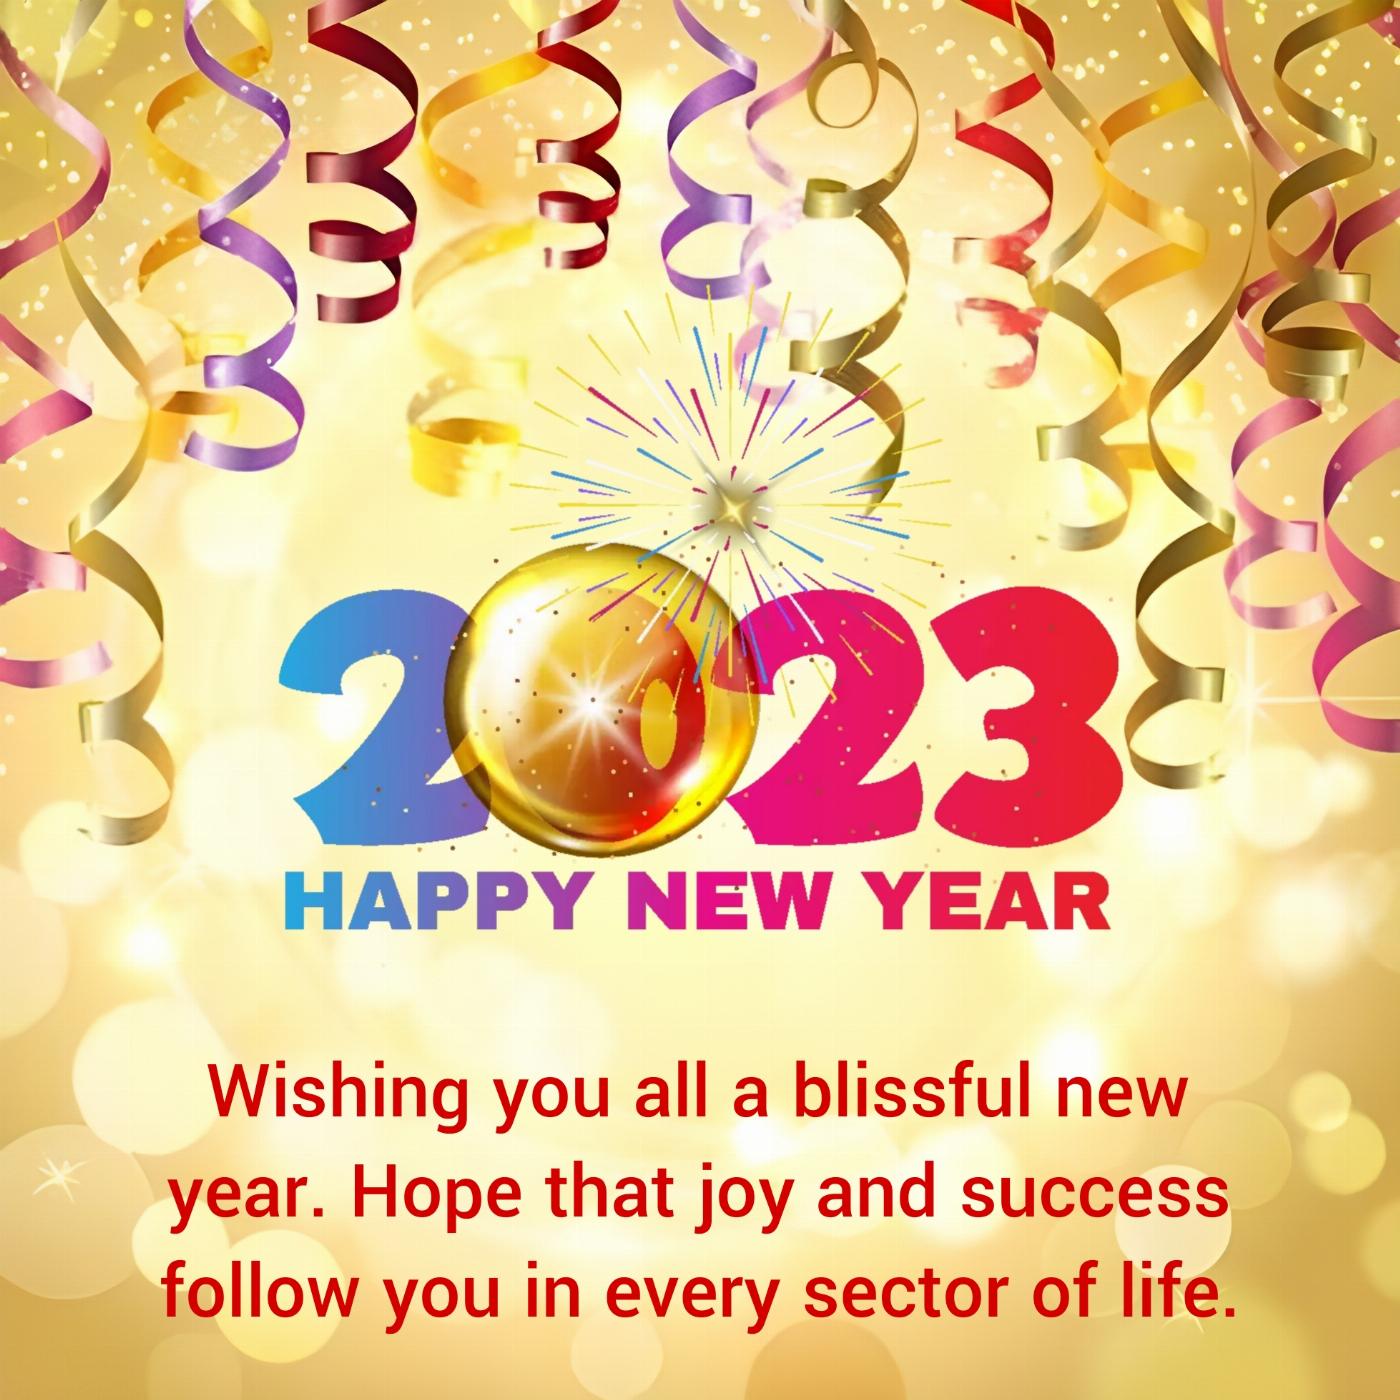 Wishing you all a blissful new year Hope that joy and success